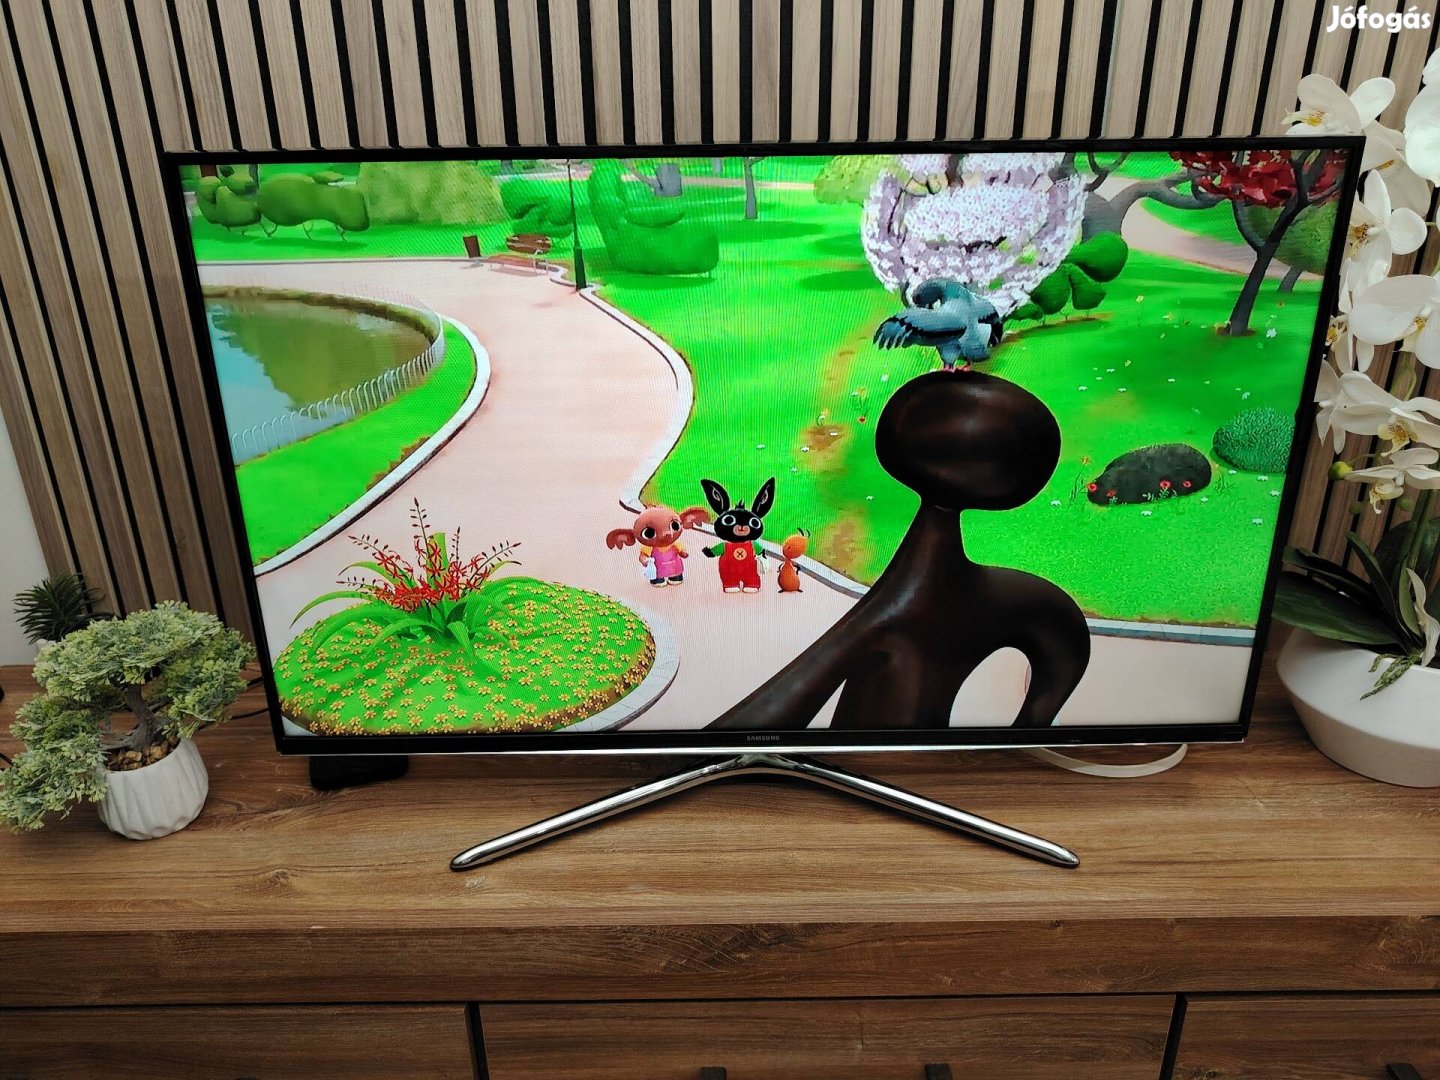 Samsung 82 LED TV. Android. SMART WIFI. 